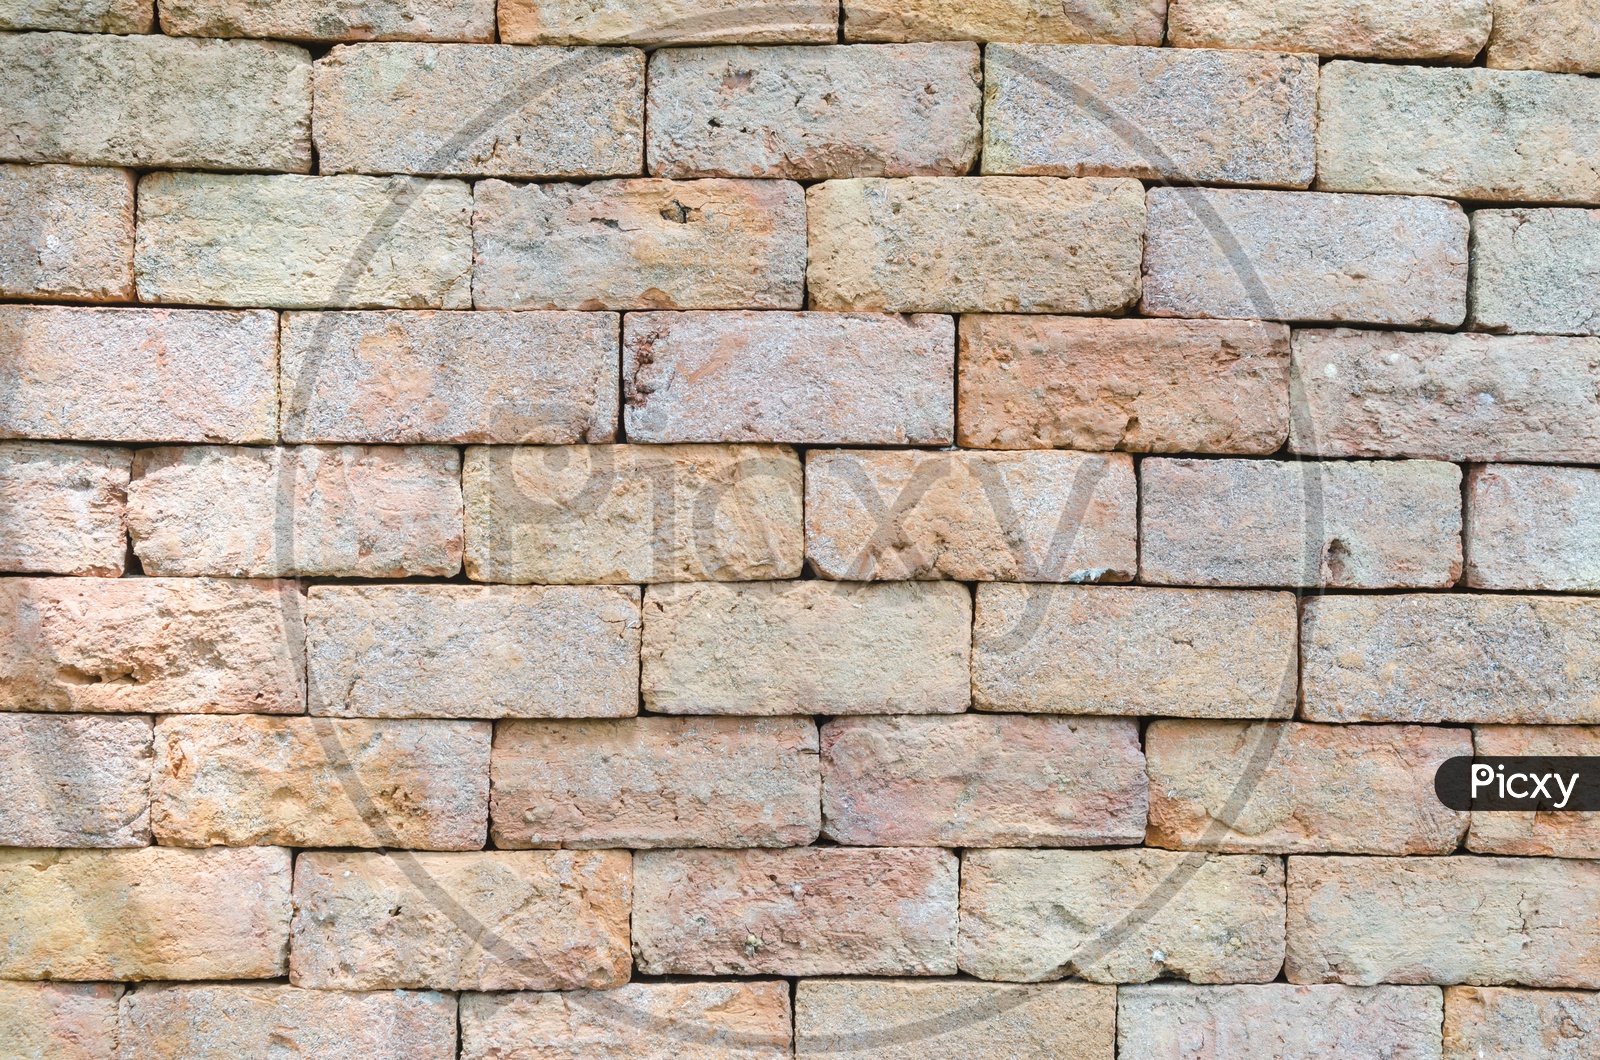 Brick Wall With Patterns Forming an Abstract Background